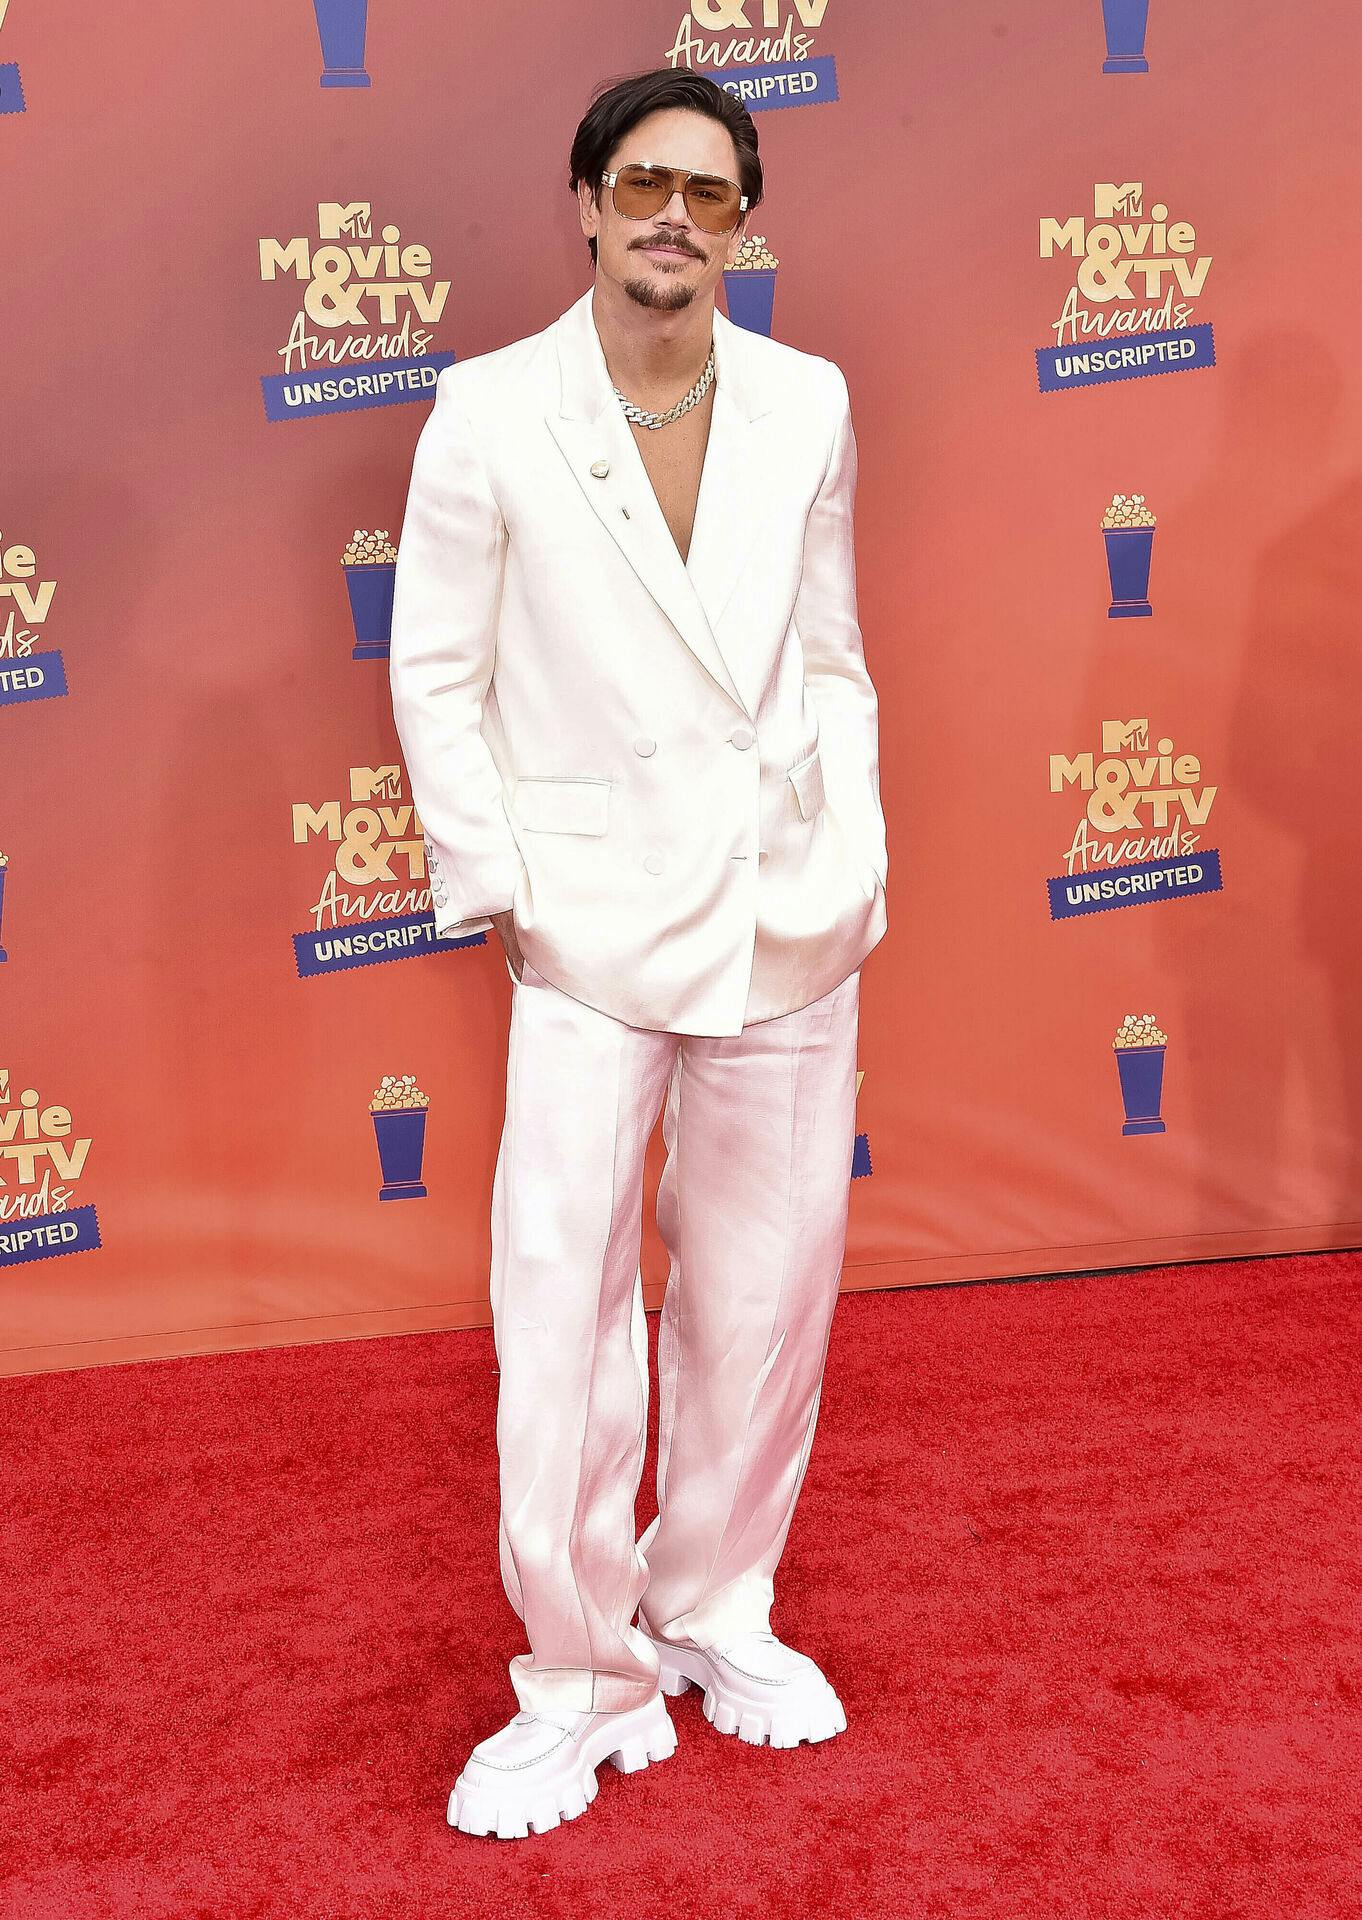 Tom Sandoval attends the 2022 MTV Movie and TV Awards: UNSCRIPTED at Barker Hangar in Santa Monica, Los Angeles, USA, on 02 June 2022. Photo by: Hubert Boesl/picture-alliance/dpa/AP Images